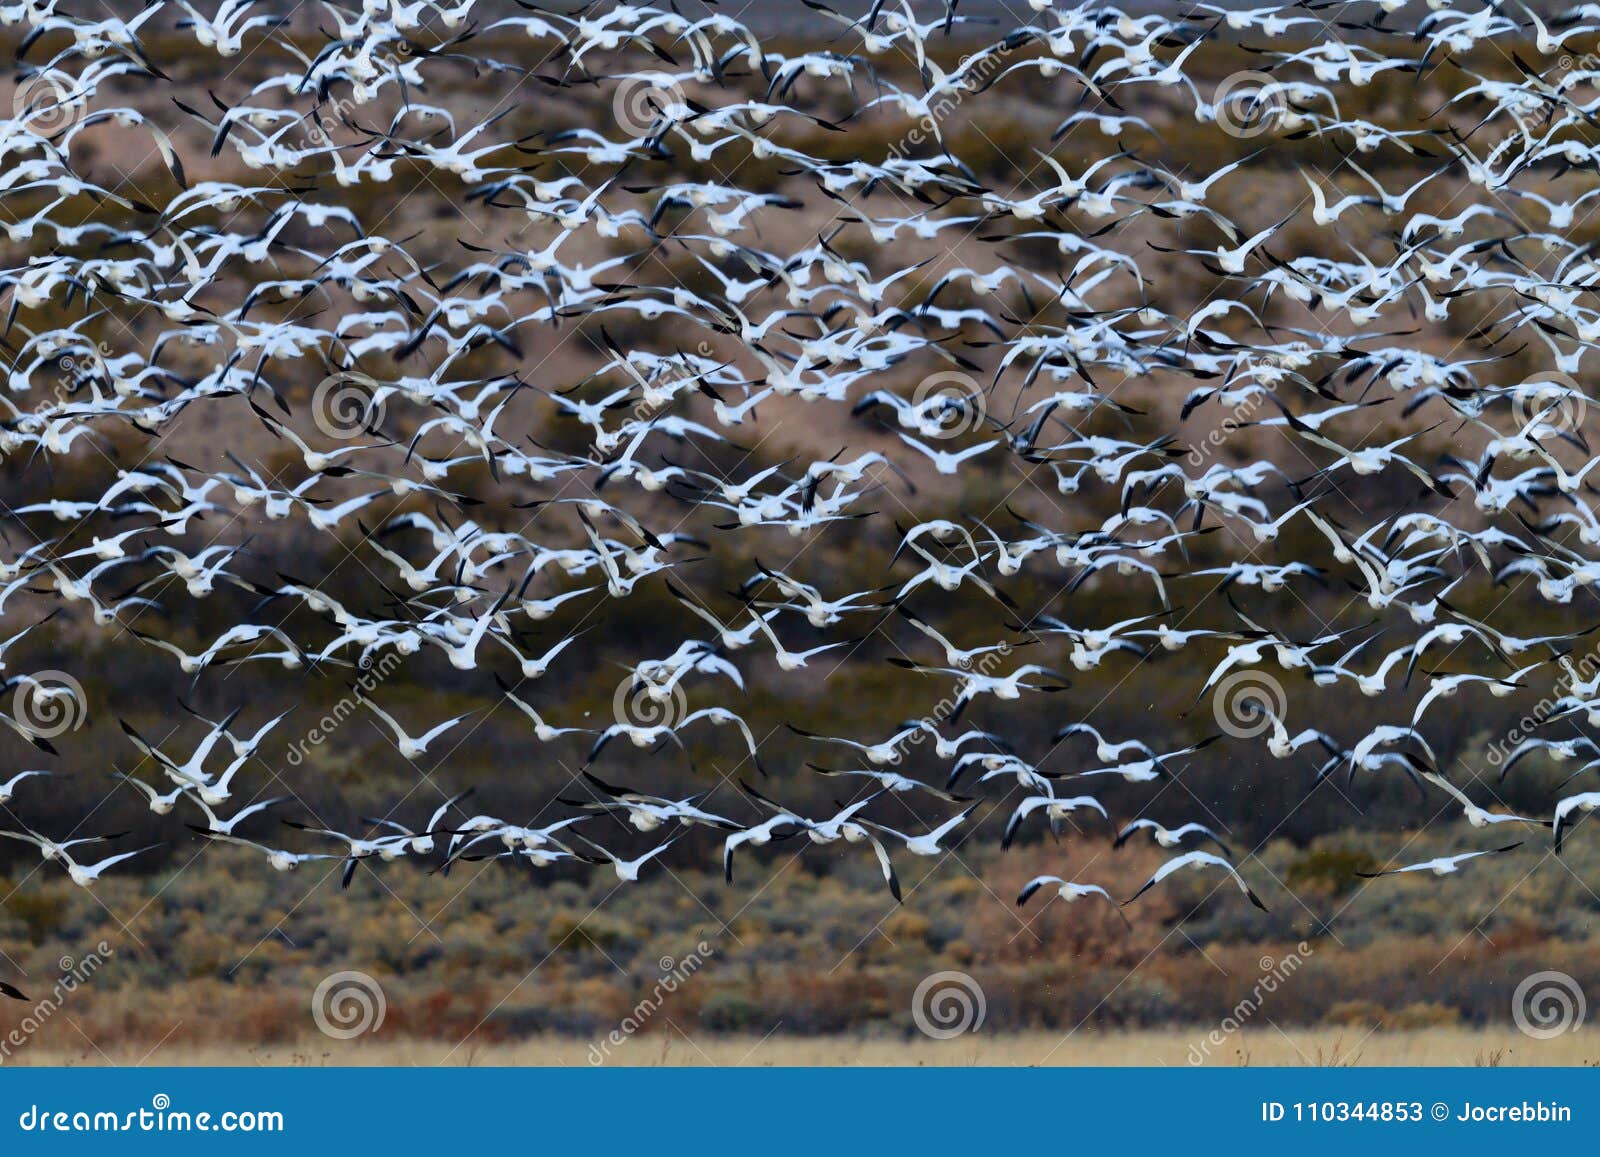 huge flock of white snow geese take flight in bosque del apache